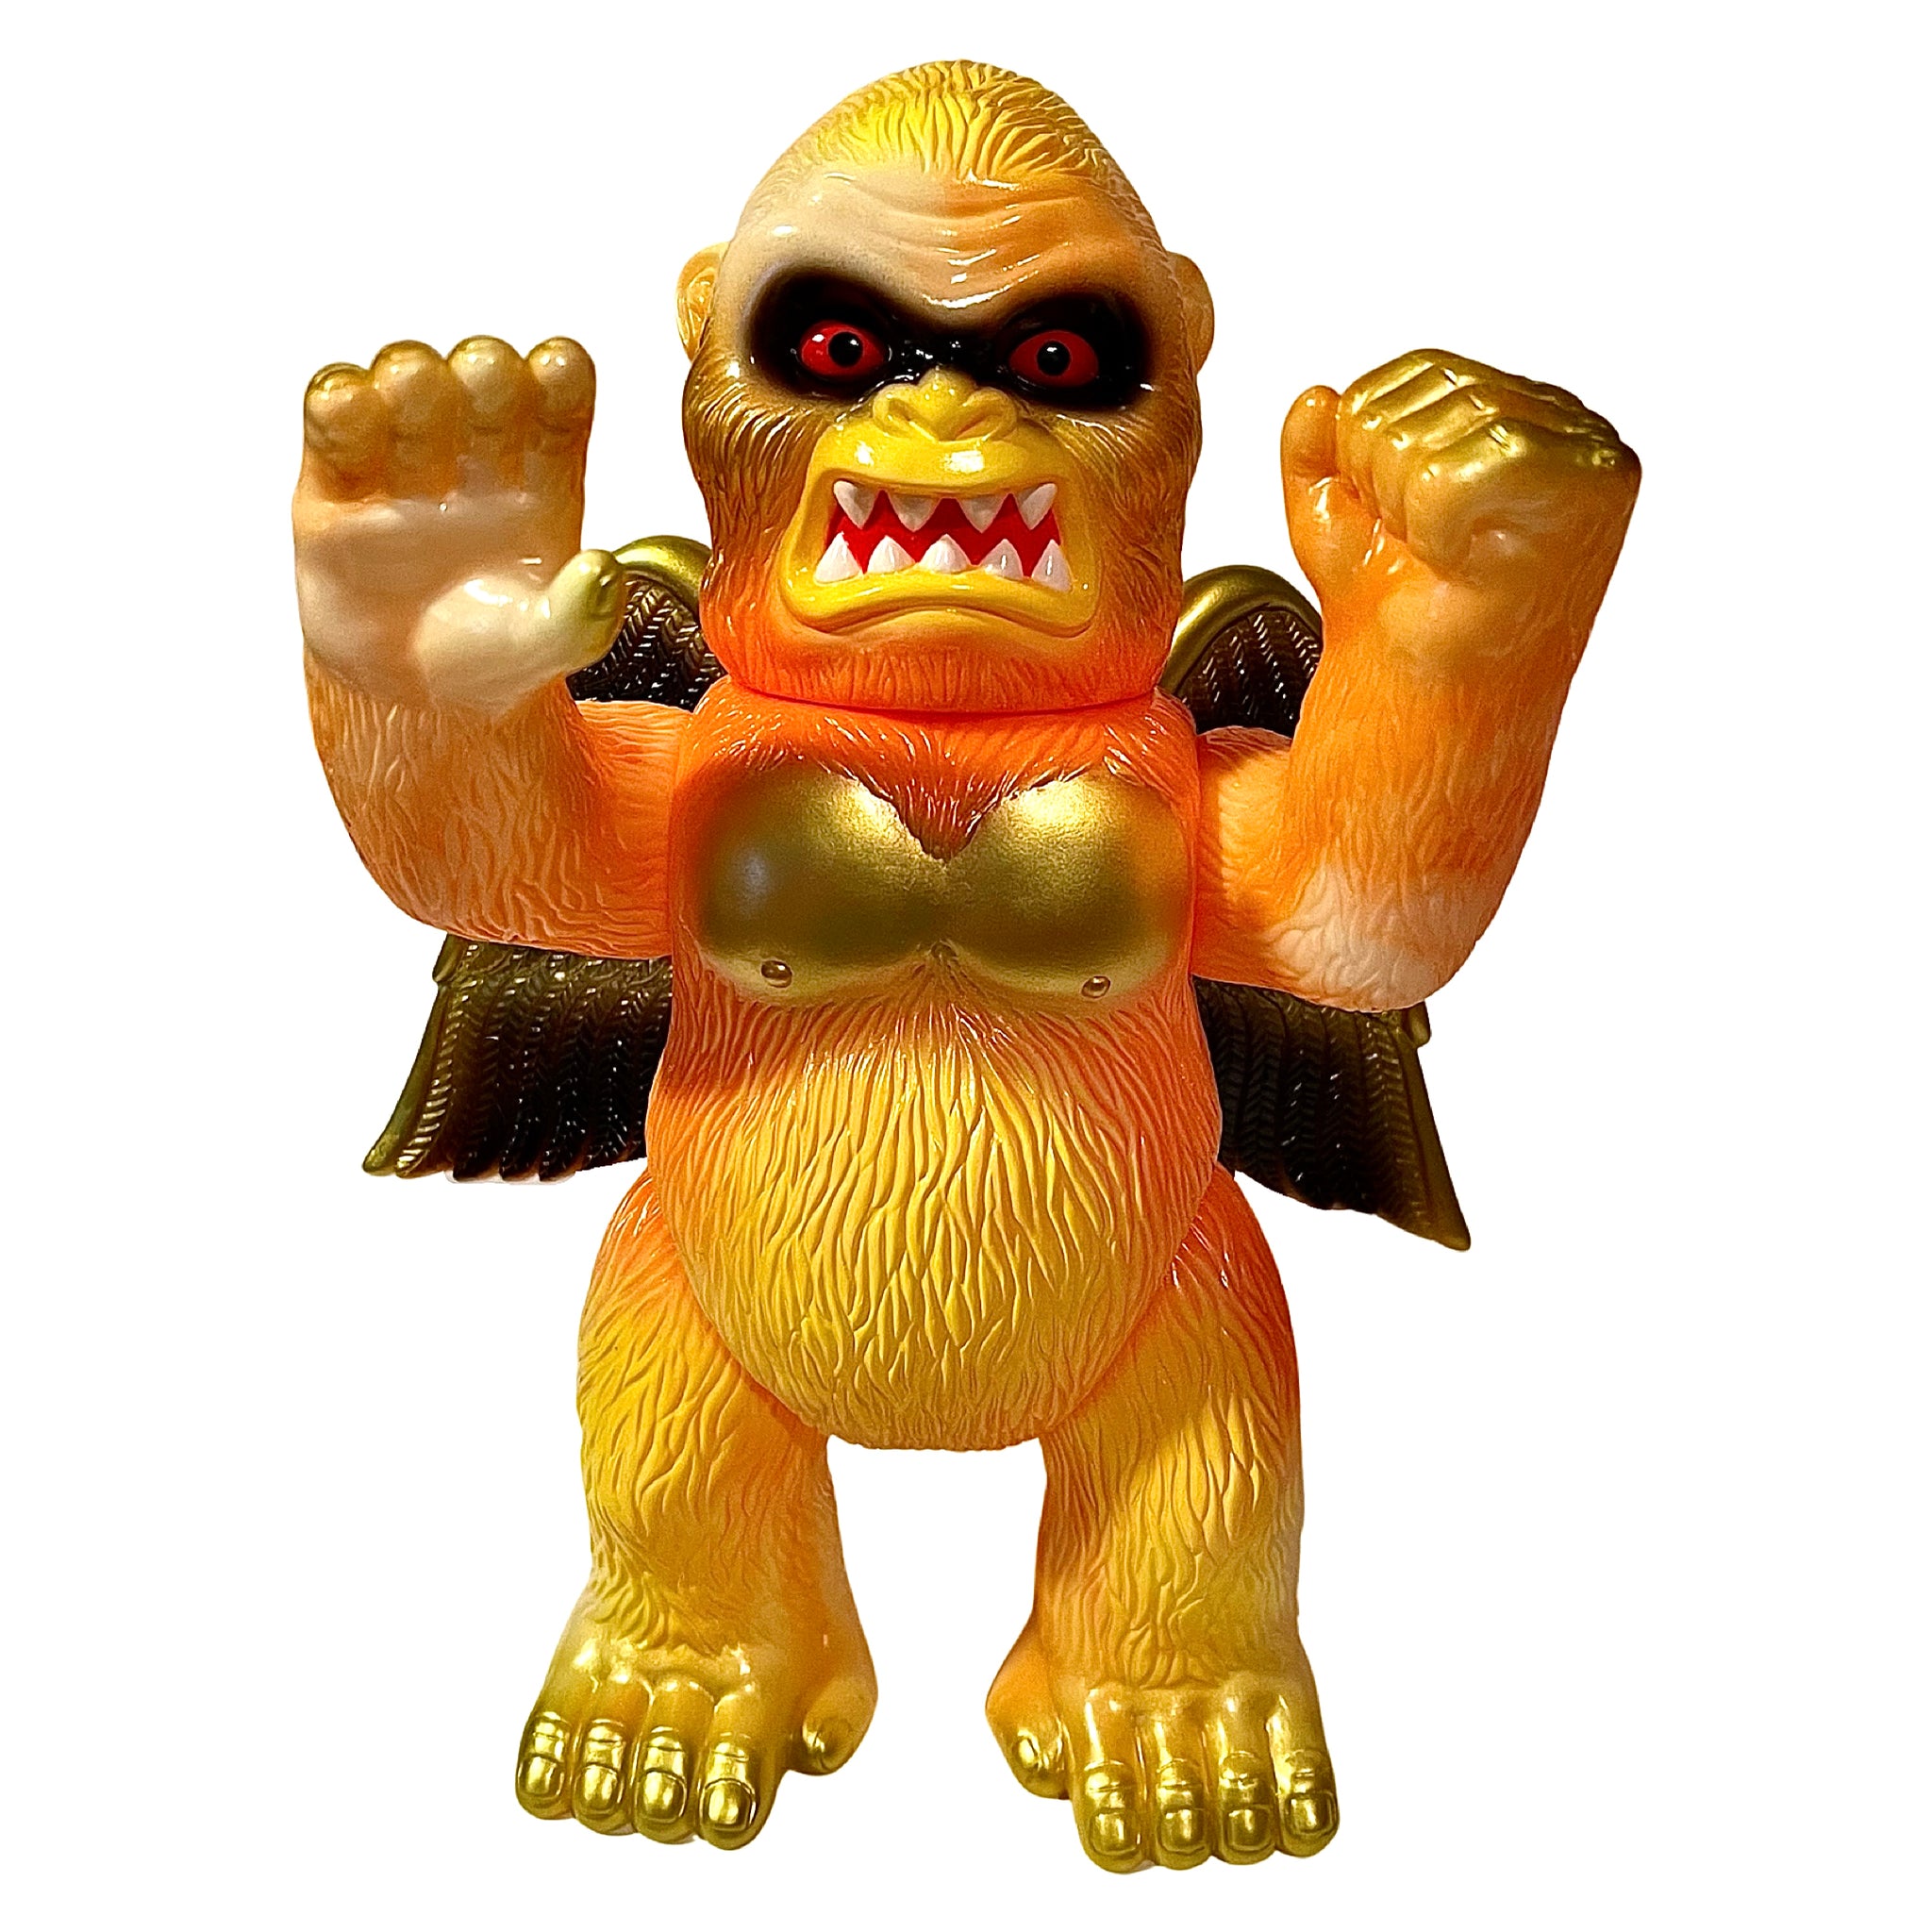 Wing Kong by Super 7, 8.5" Tall, Glow In the Dark Soft Vinyl with Orange, Yellow & Gold paint